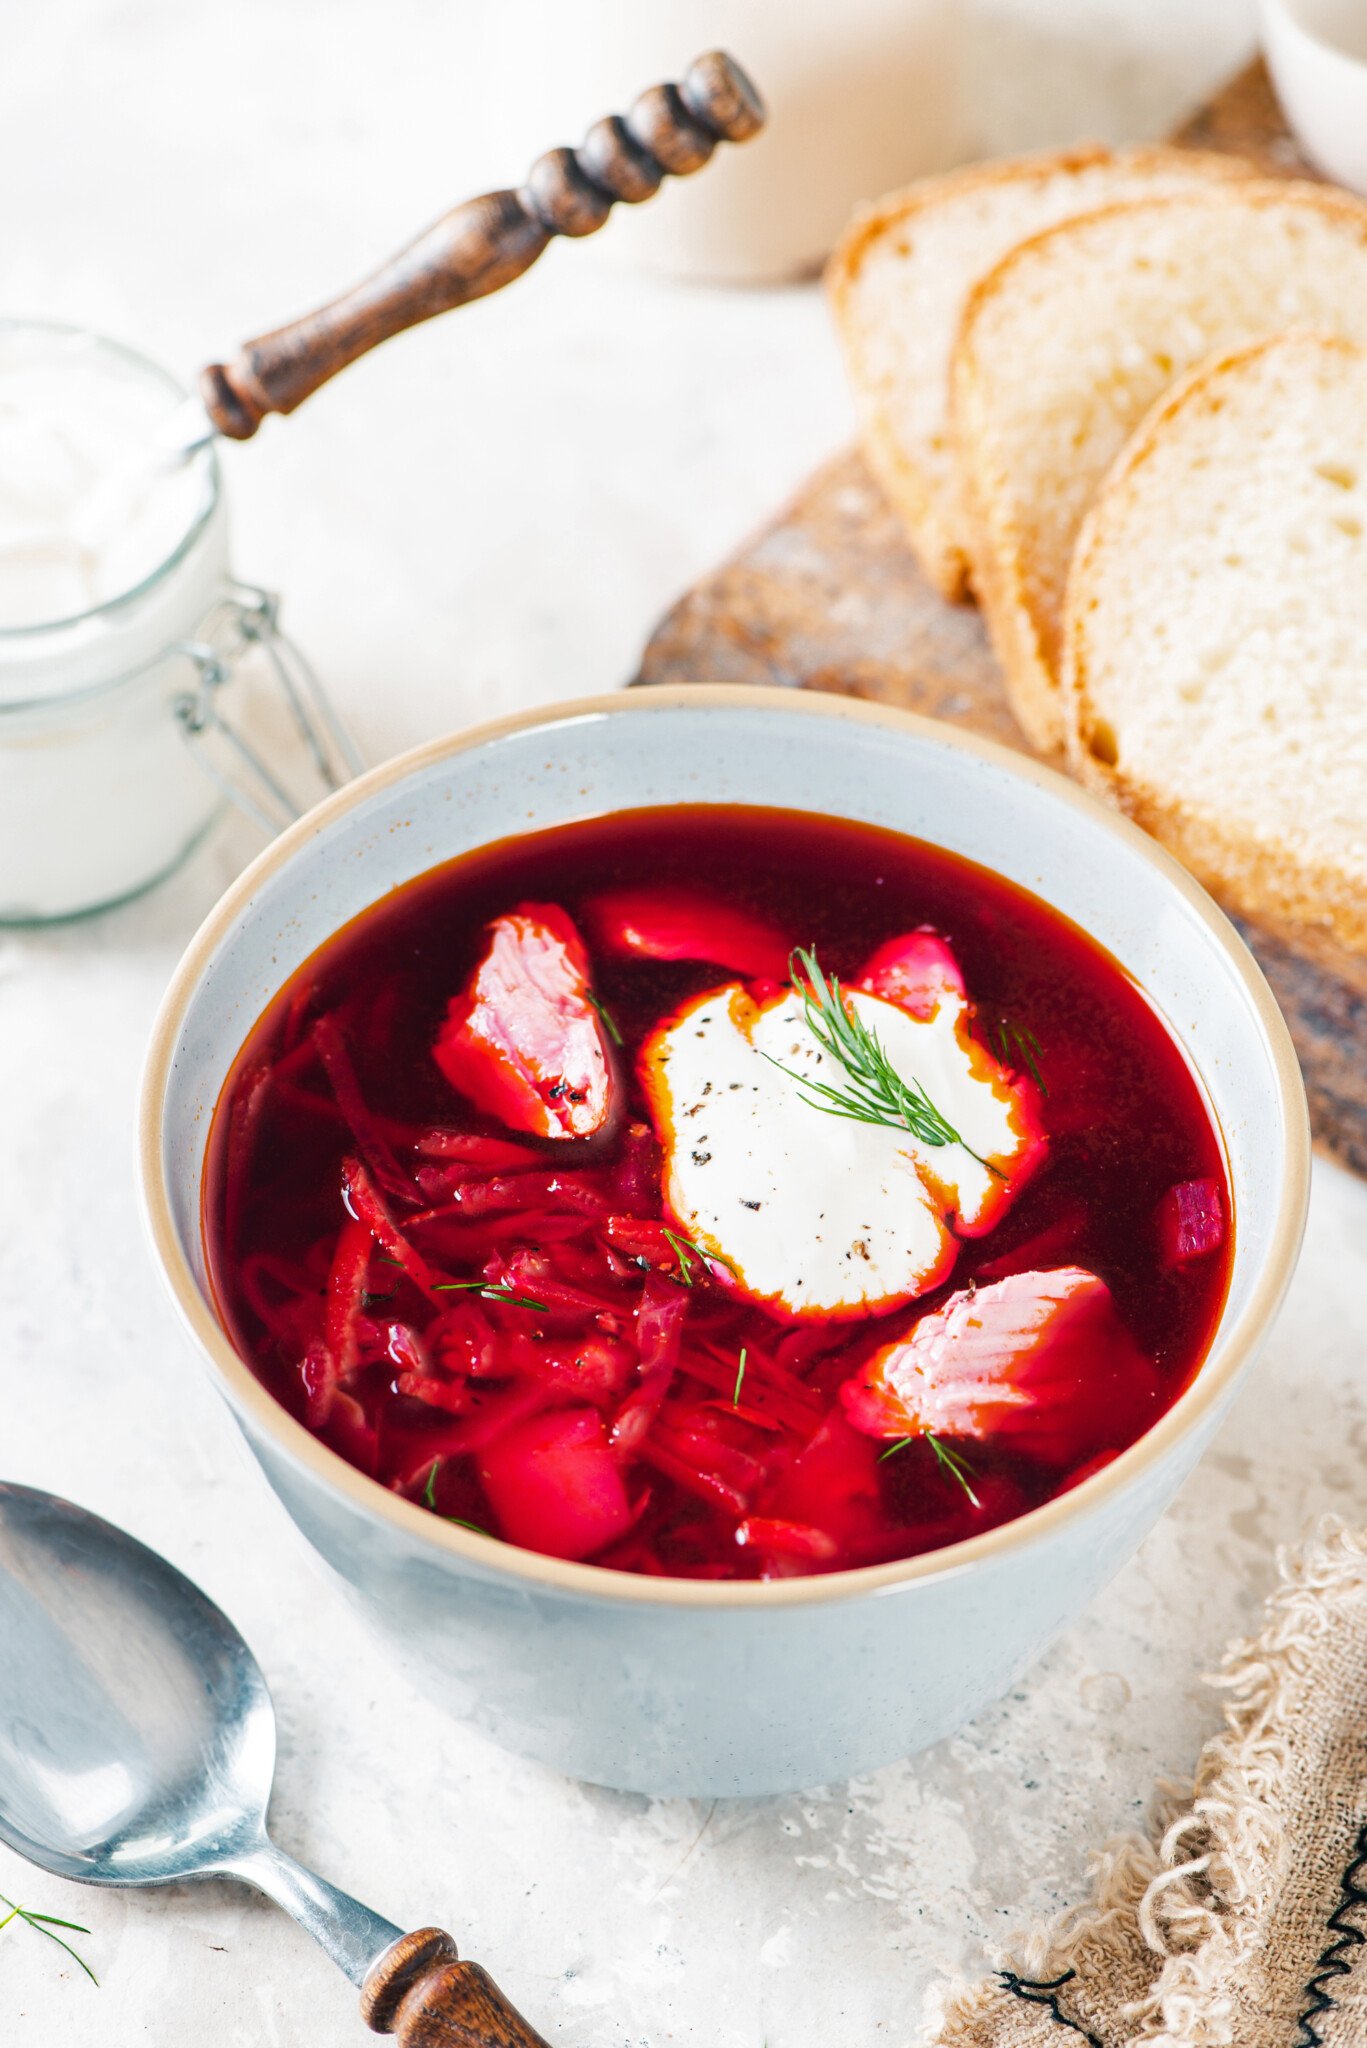 wooden-board-white-bread-white-bowl-red-borscht-sour-cream-dill-clear-bowl-with-sour-cream-and-a-wooden-spoon-brown-towel